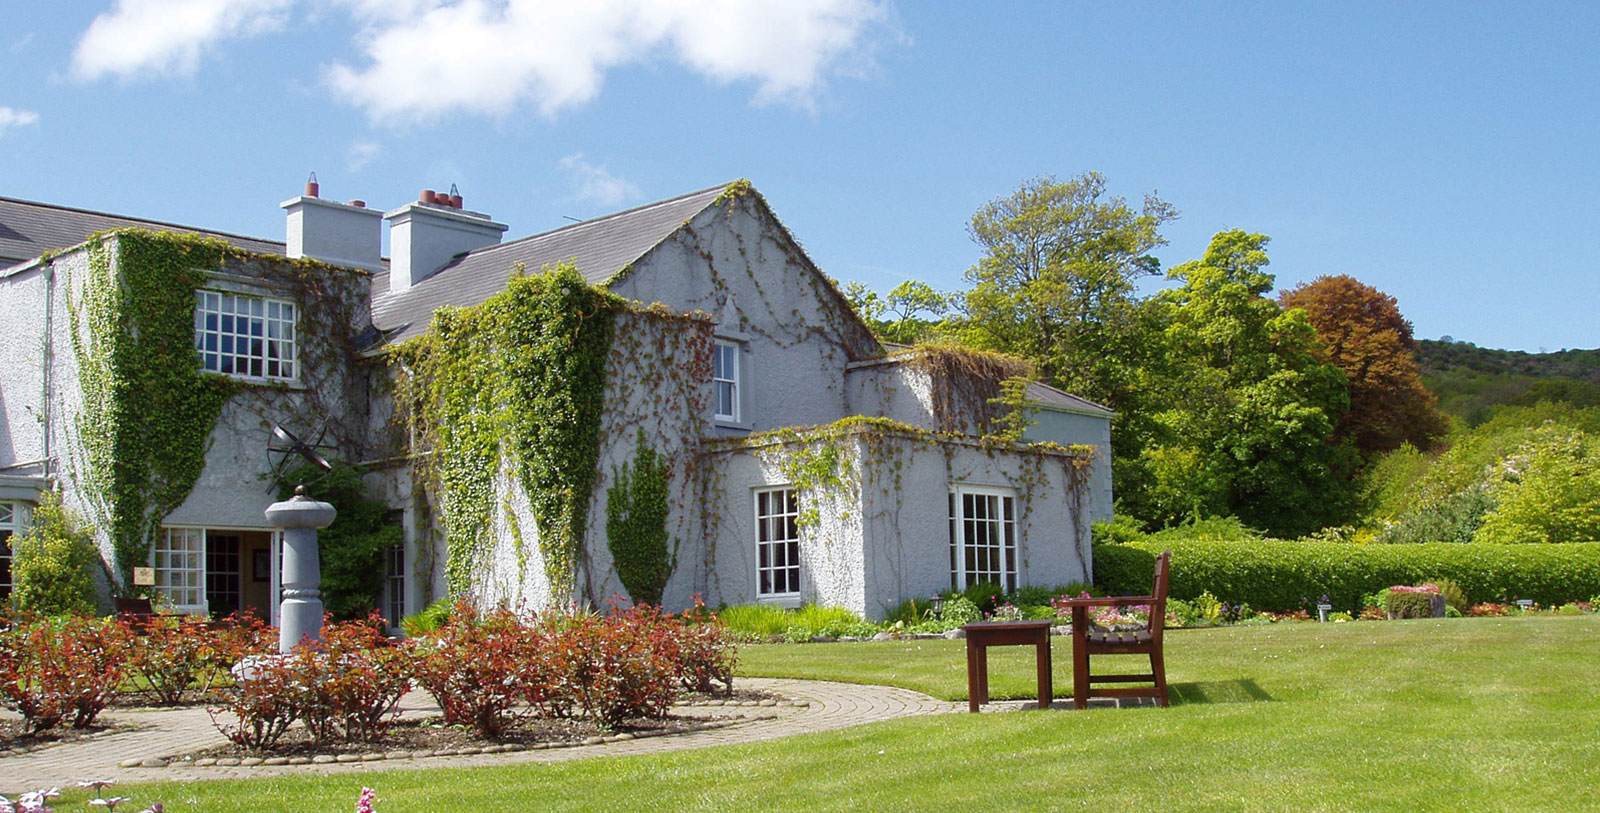 Image of Hotel Exterior & Garden, Gregans Castle Hotel, Ballyvaughan, Ireland, 1800s , Member of Historic Hotels Worldwide, Special Offers, Discounted Rates, Families, Romantic Escape, Honeymoons, Anniversaries, Reunions